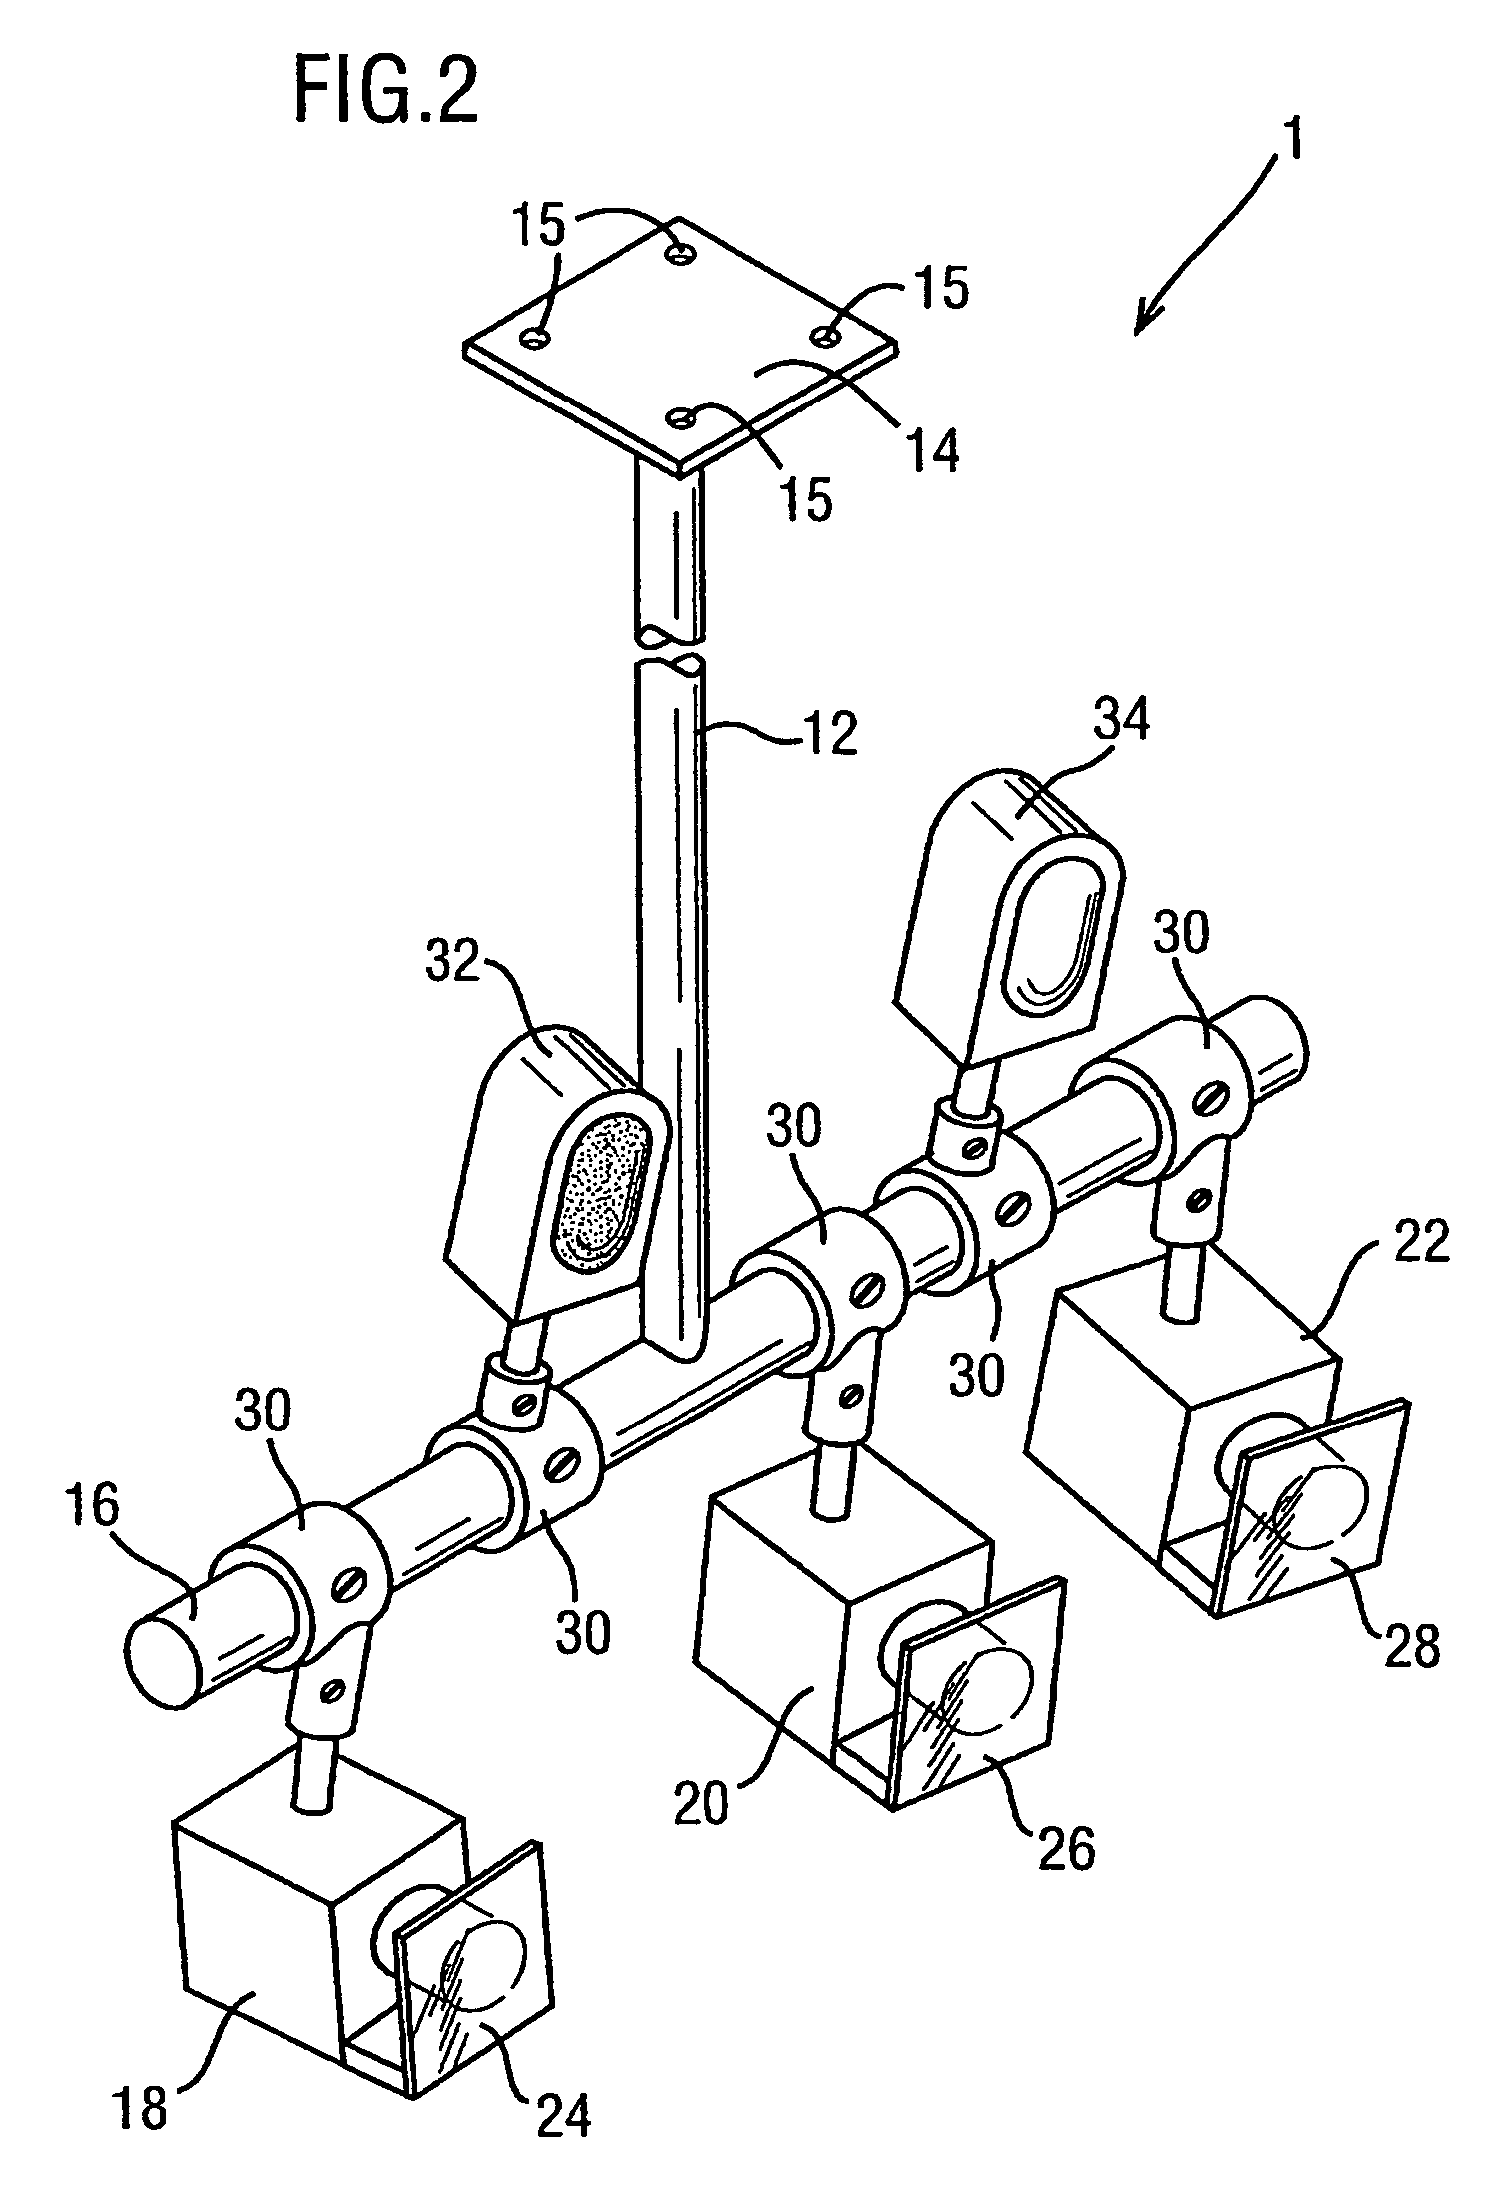 Image processing system for use with a patient positioning device